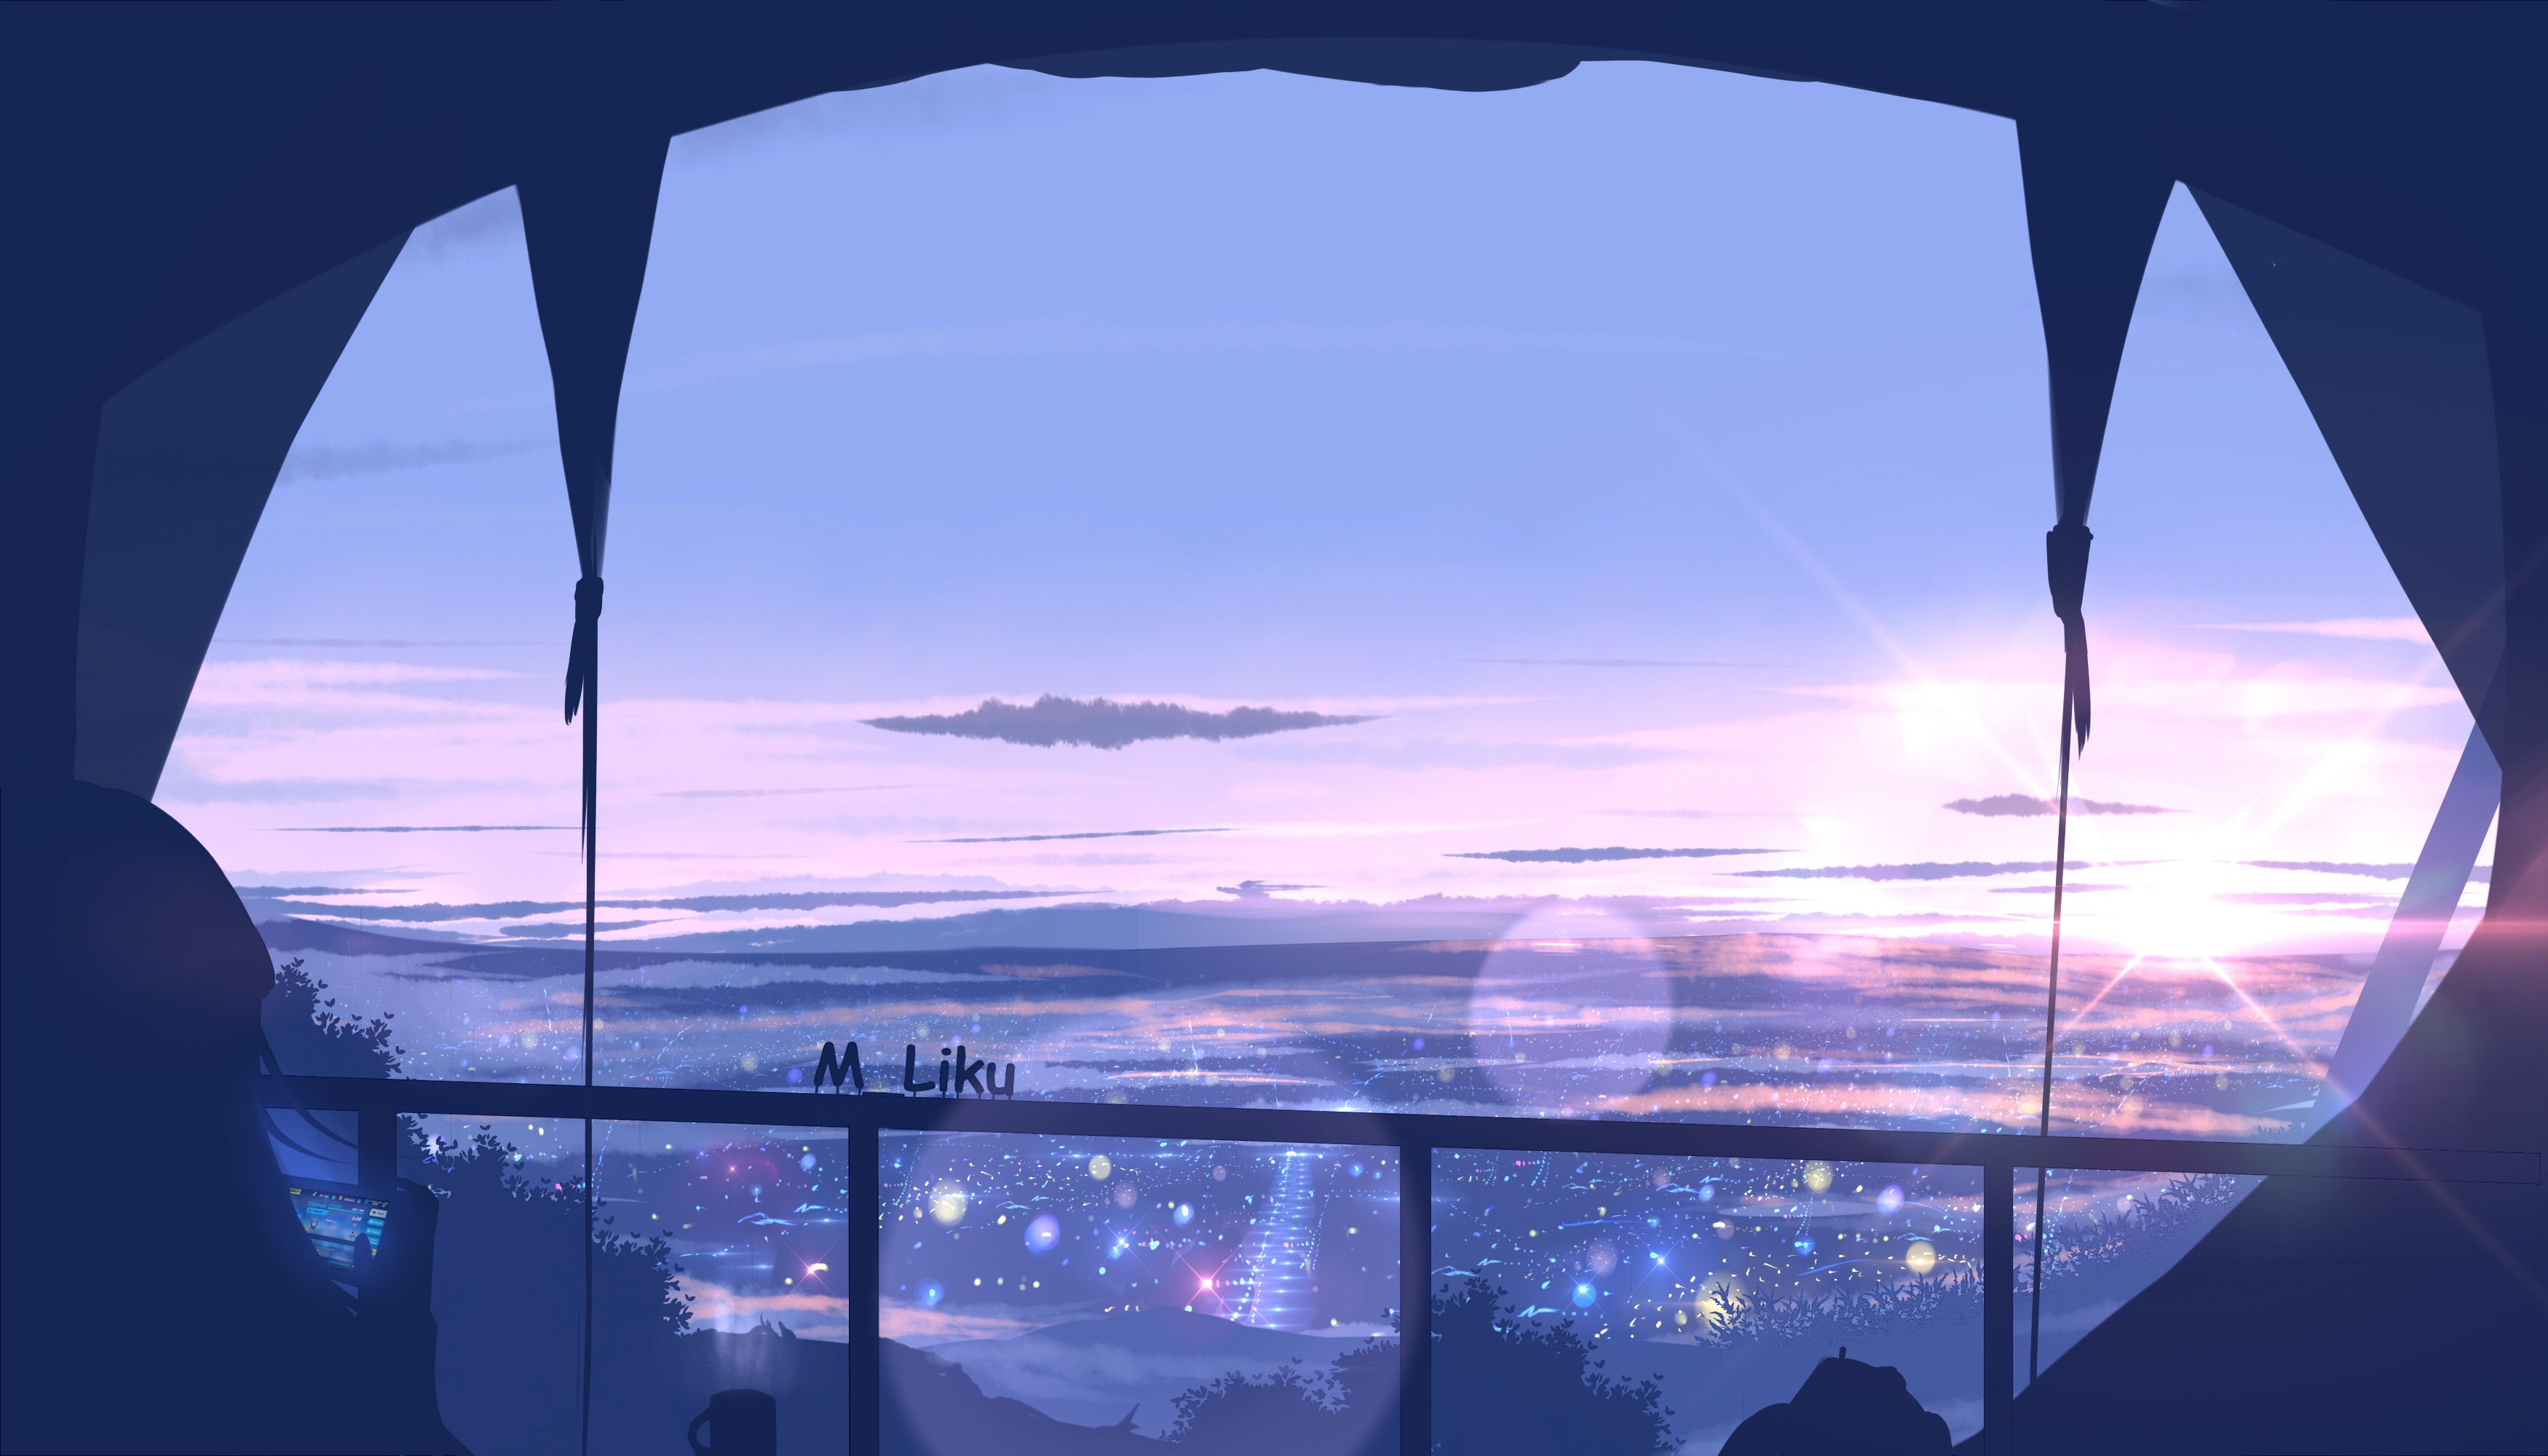 A view of the city from an open window - Anime landscape